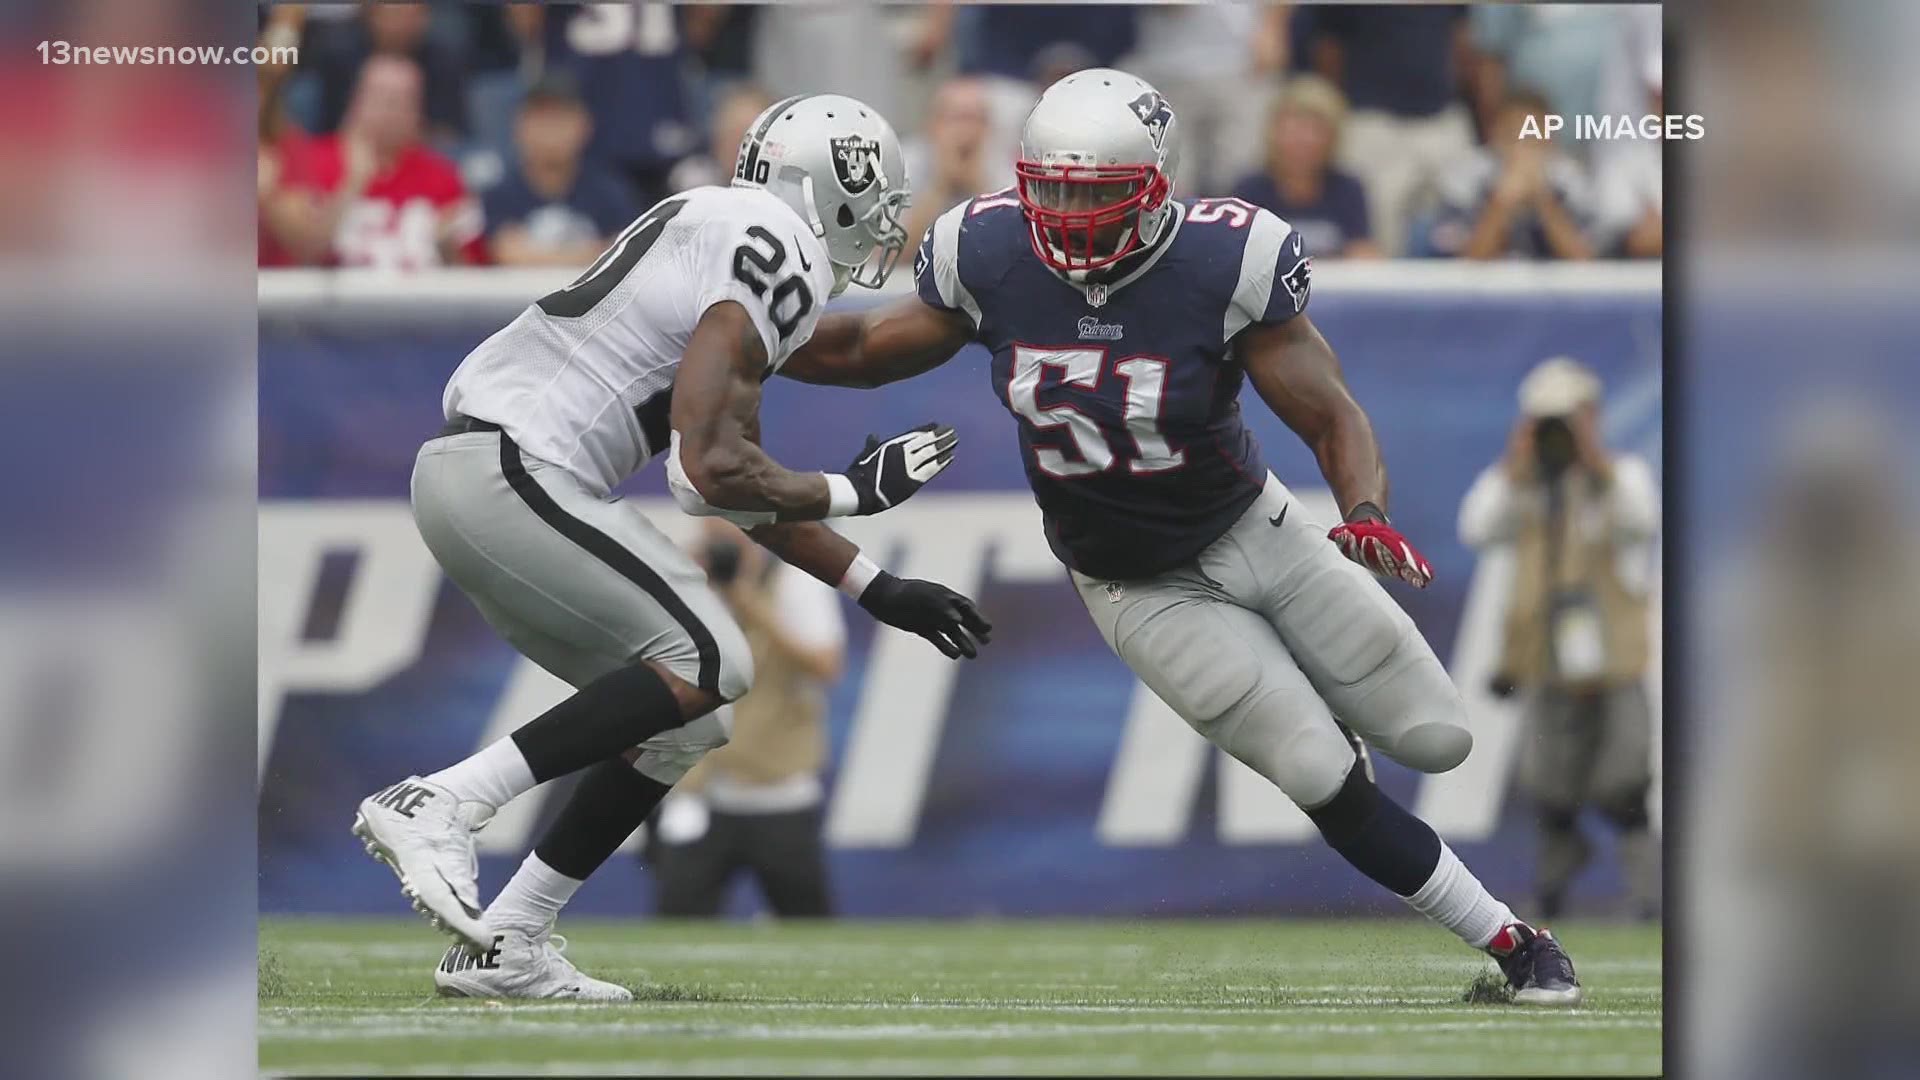 Jerod Mayo was a 2-time Pro Bowl linebacker with the Patriots. He would be apart of their 2014 Super Bowl title team.